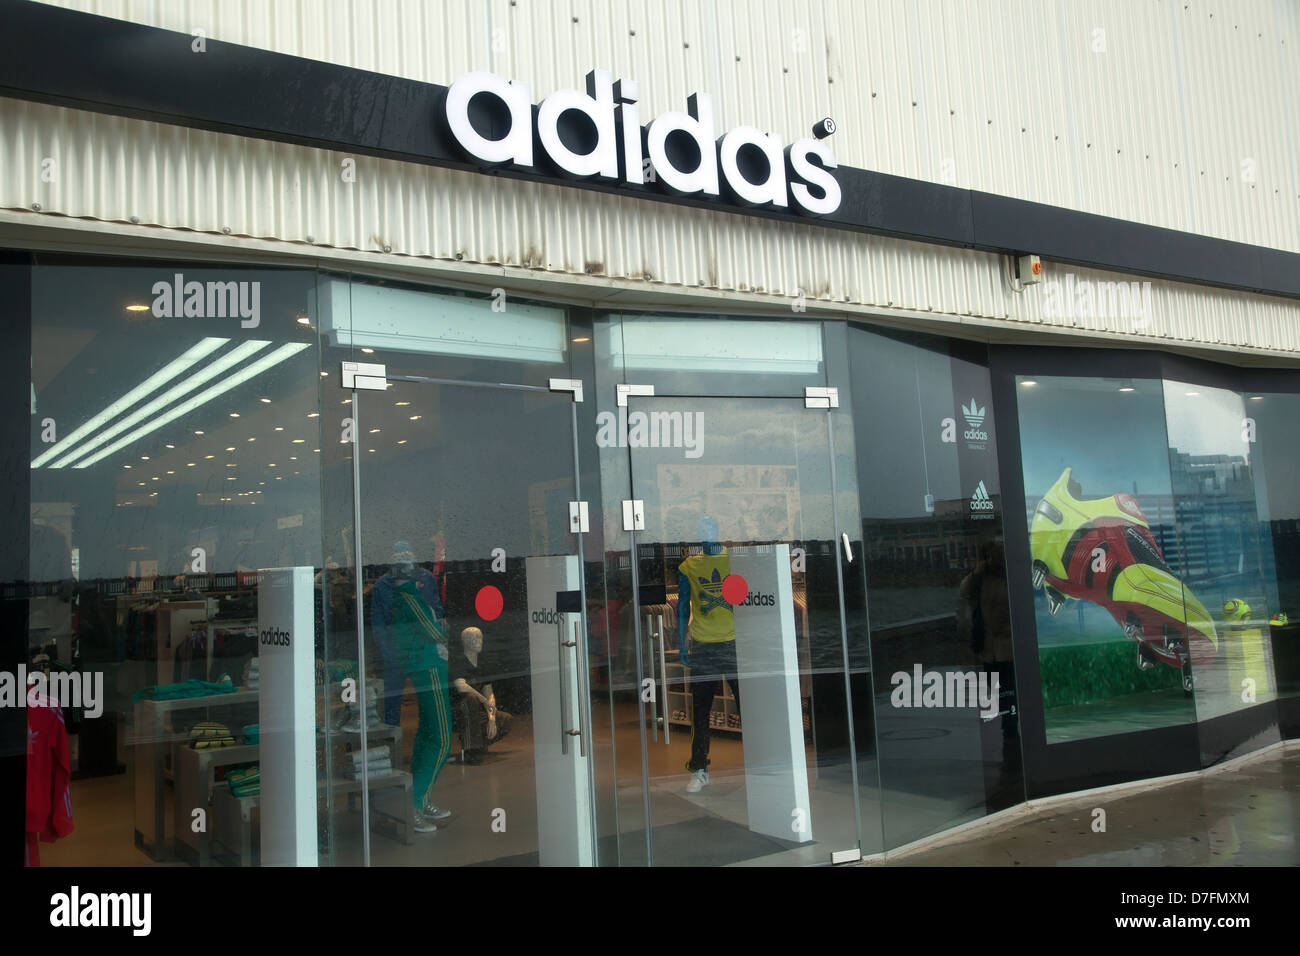 outlet adidas israel